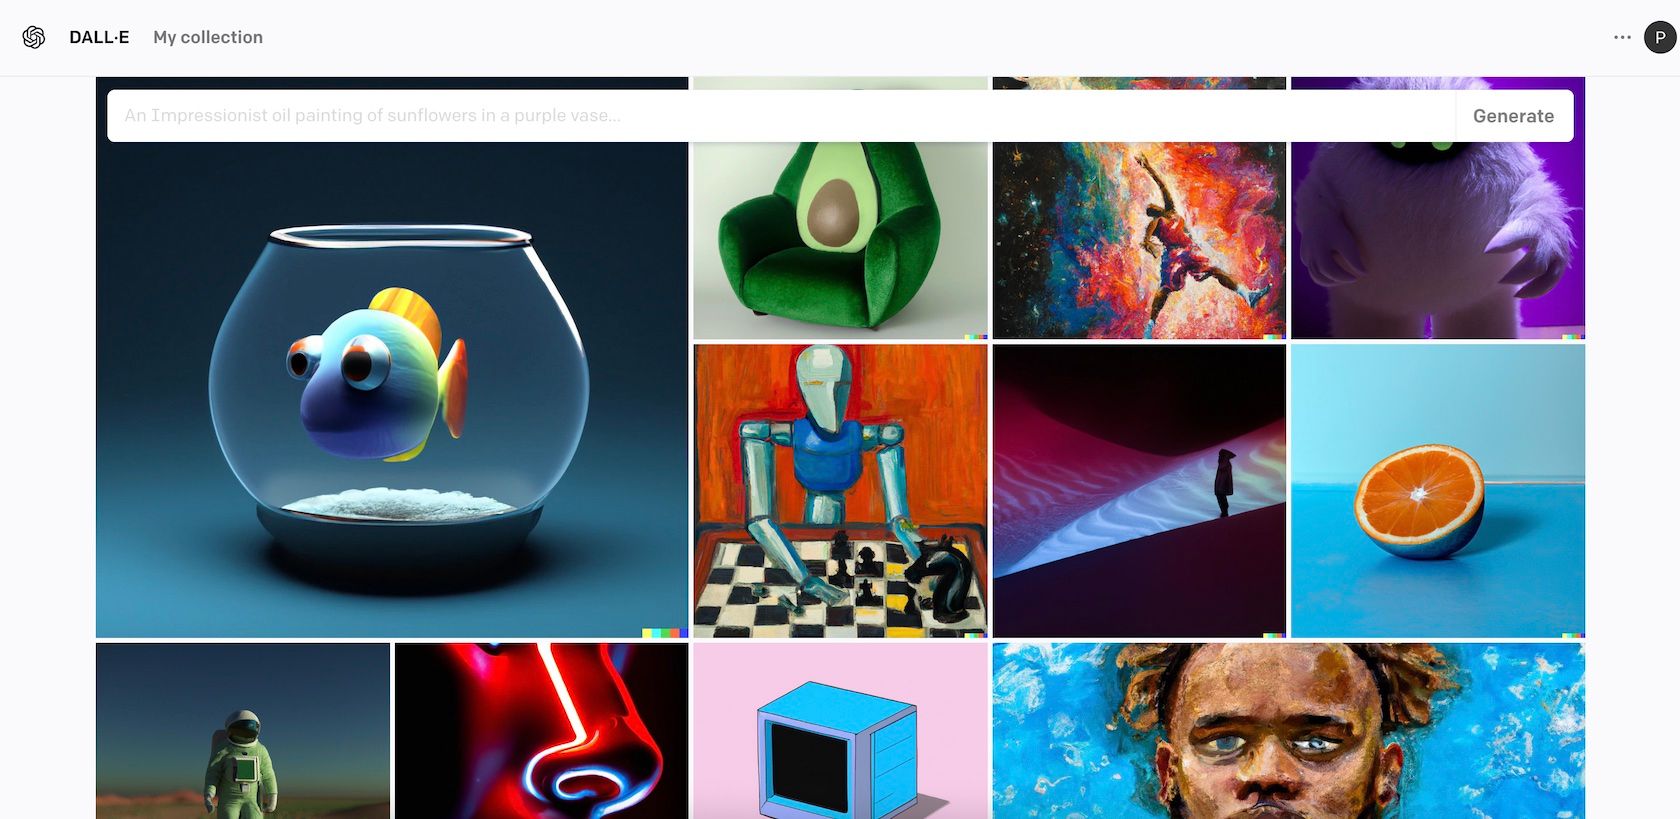 Screenshot of Dall-E website homepage showing different AI generated art.